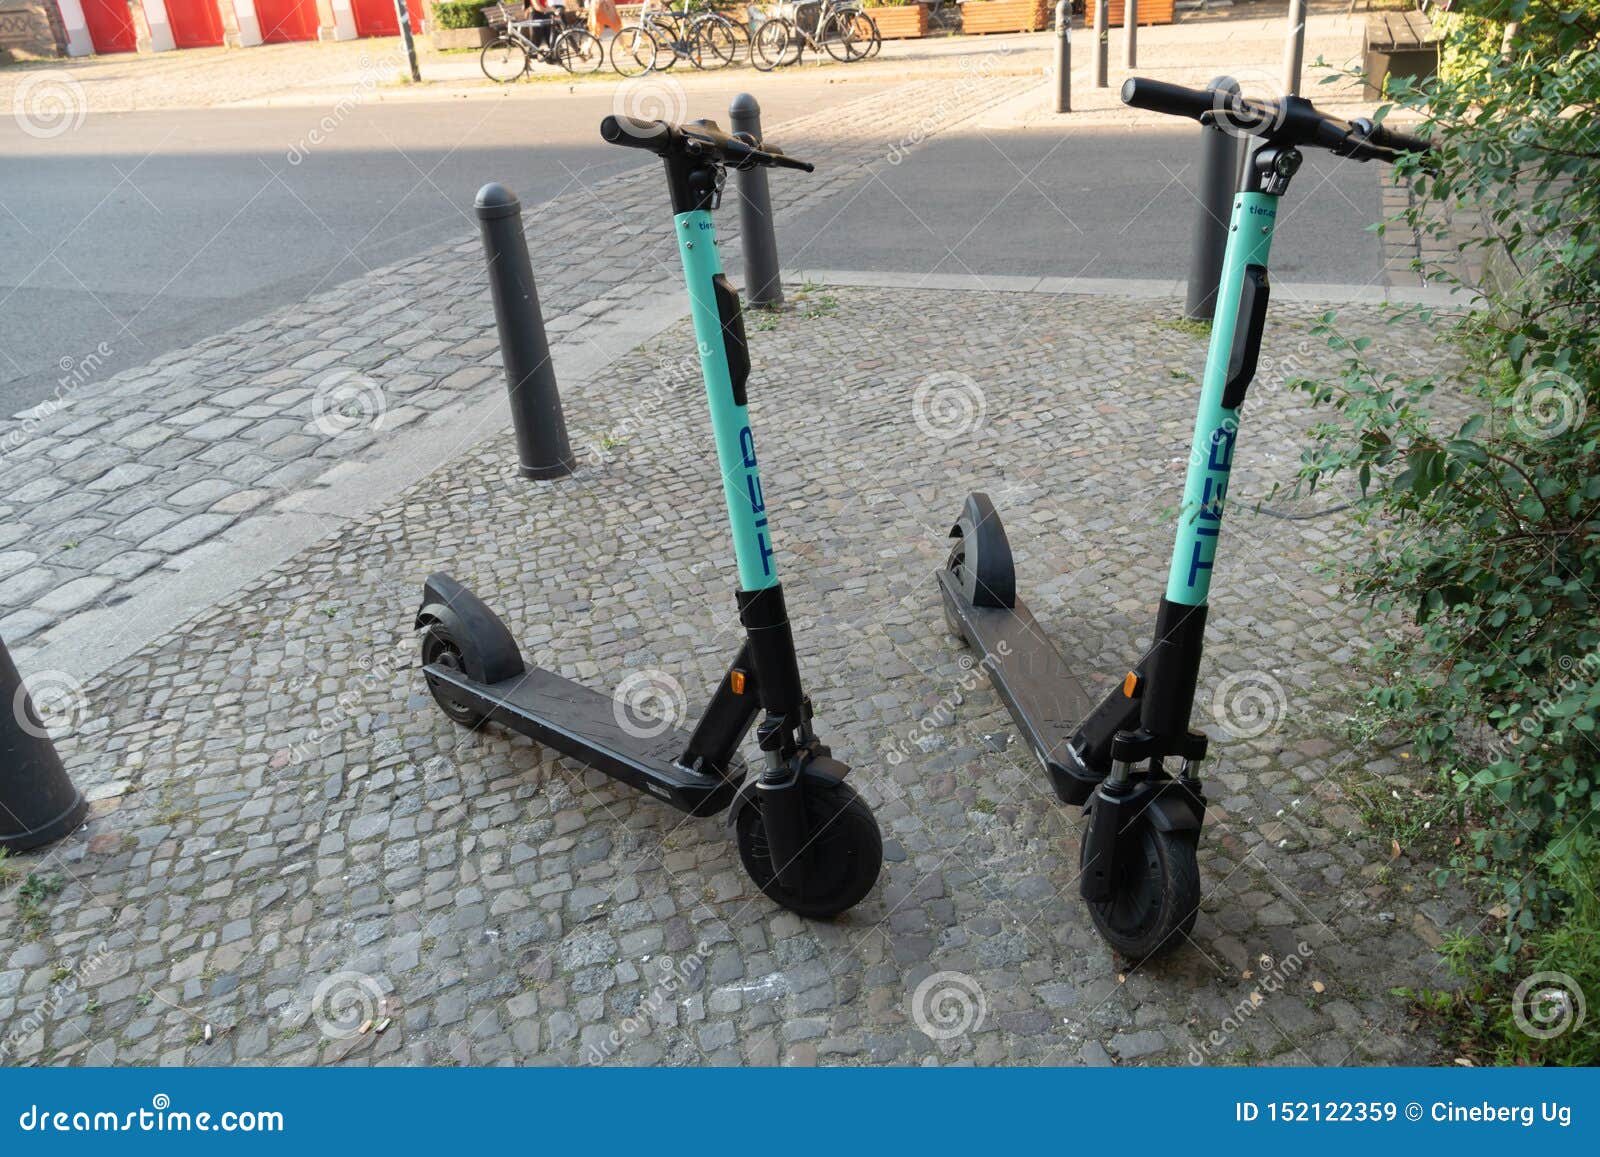 Tier Mobility Electric Editorial Stock Image of brand, company: